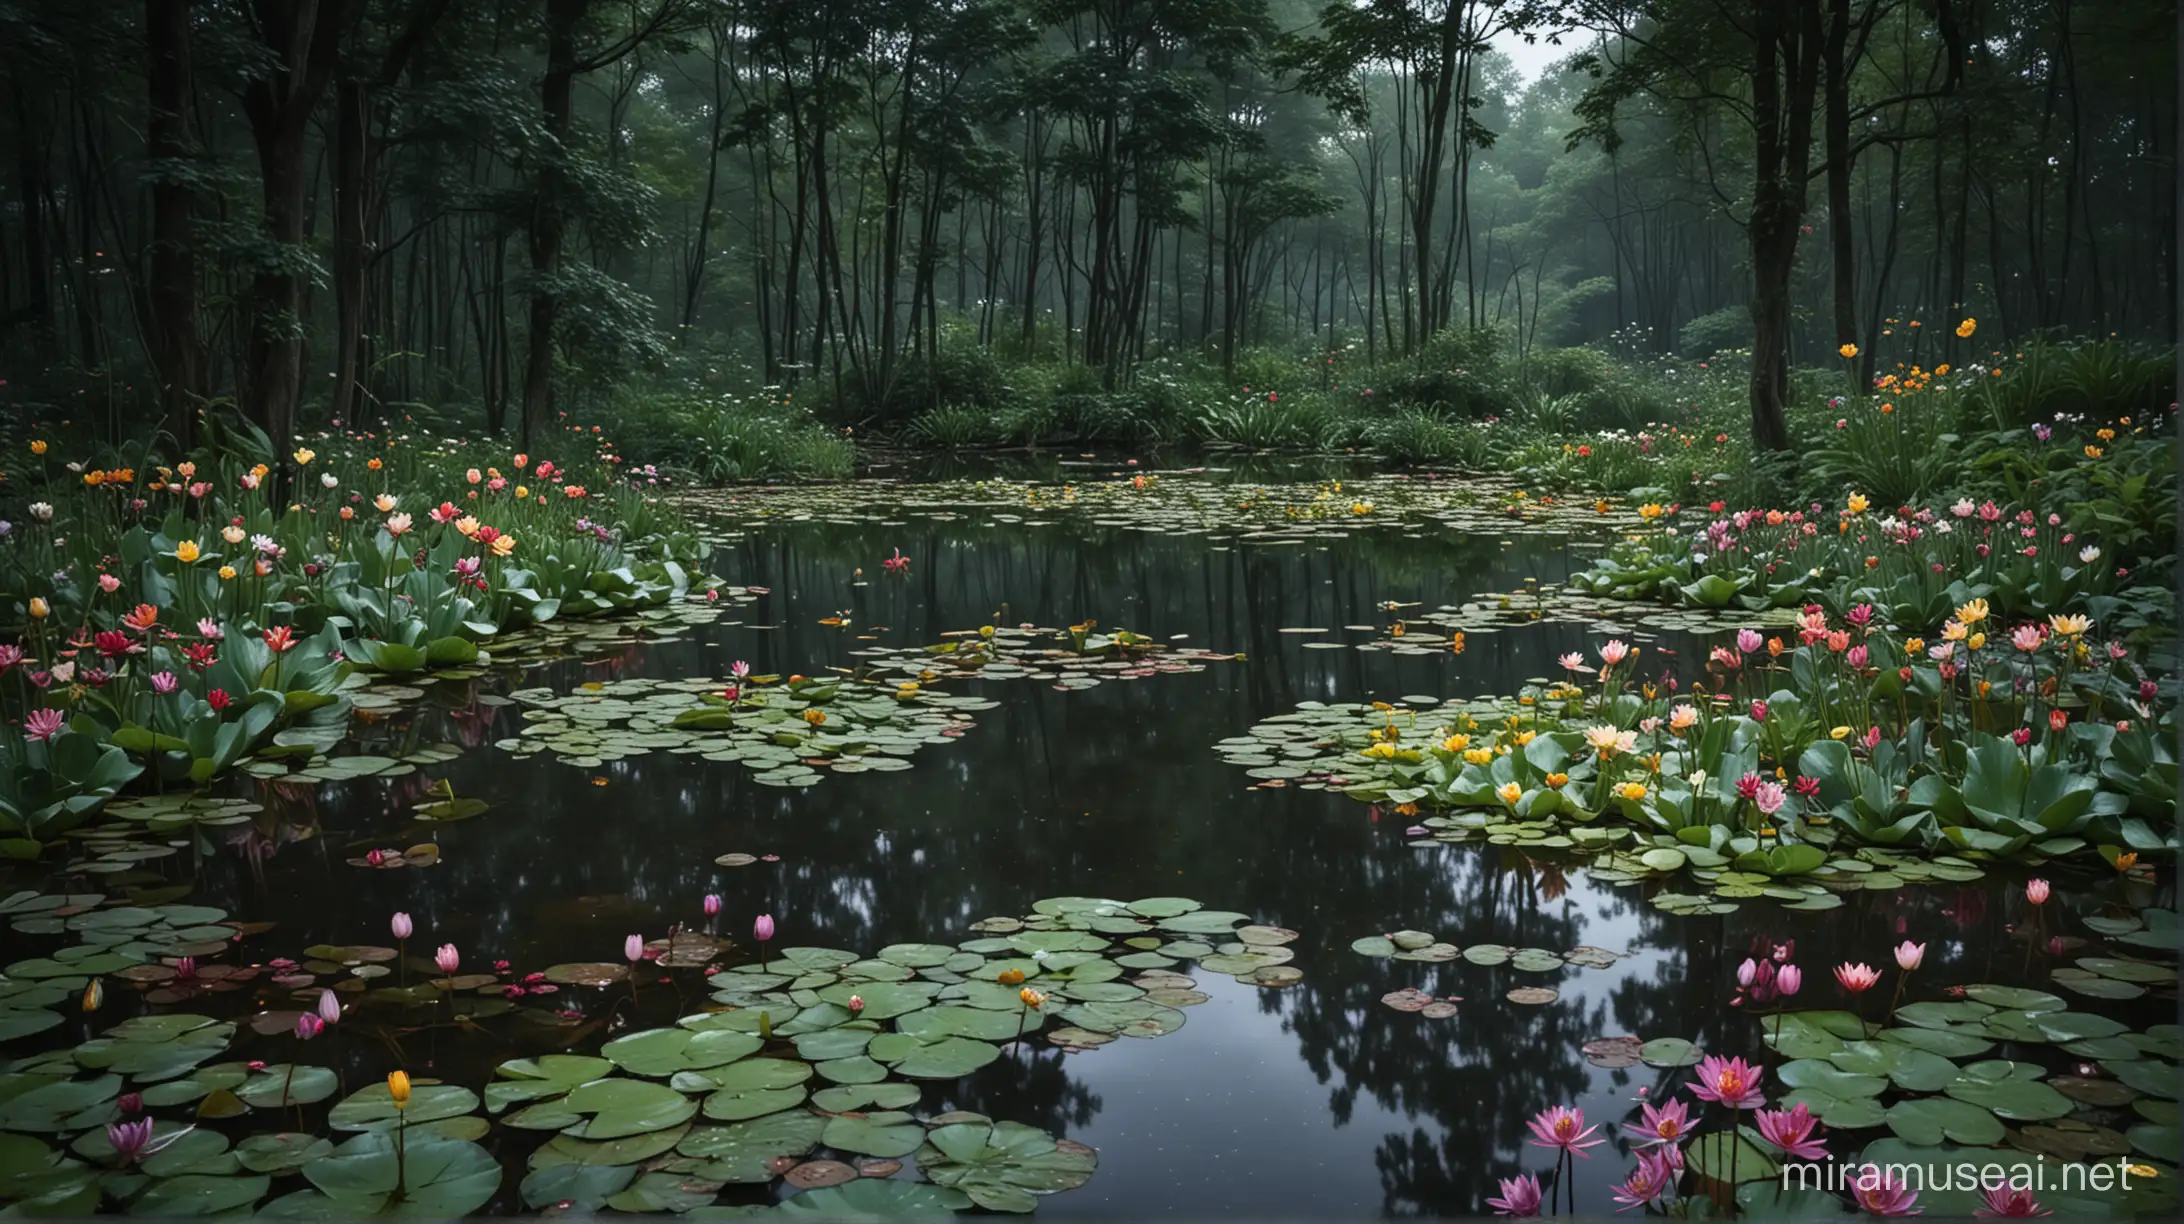 a secret place consisting in a beautiful pond surrounded by rocks in the middle of a forest with old thick trees and colorful flowers, the pond has 3 water lillies, at night, it is dark, it is raining heavily